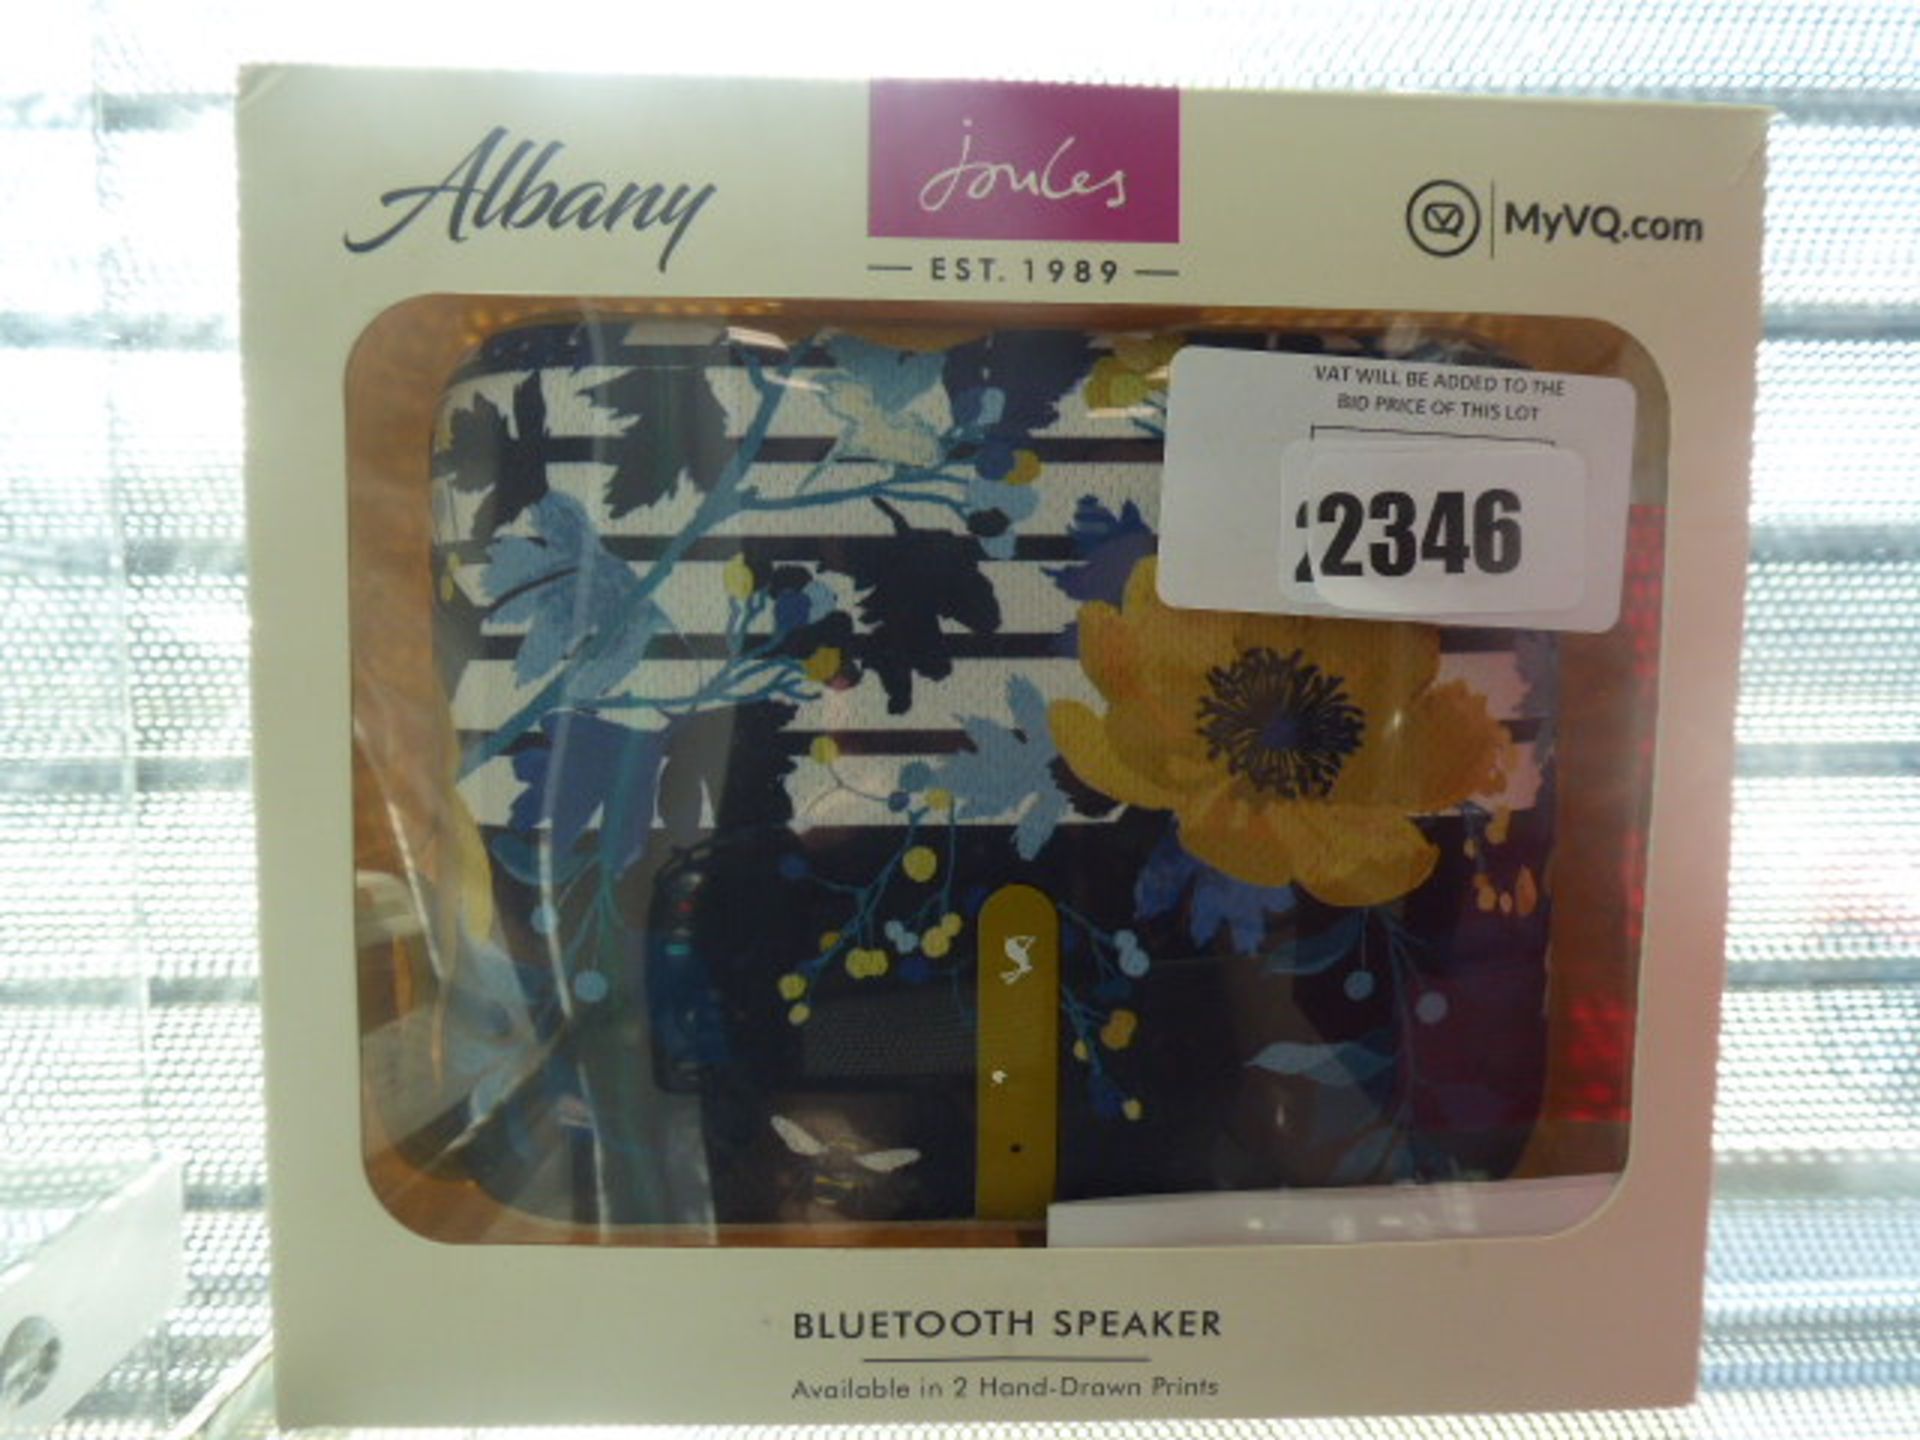 2328 Albany bluetooth speaker with box